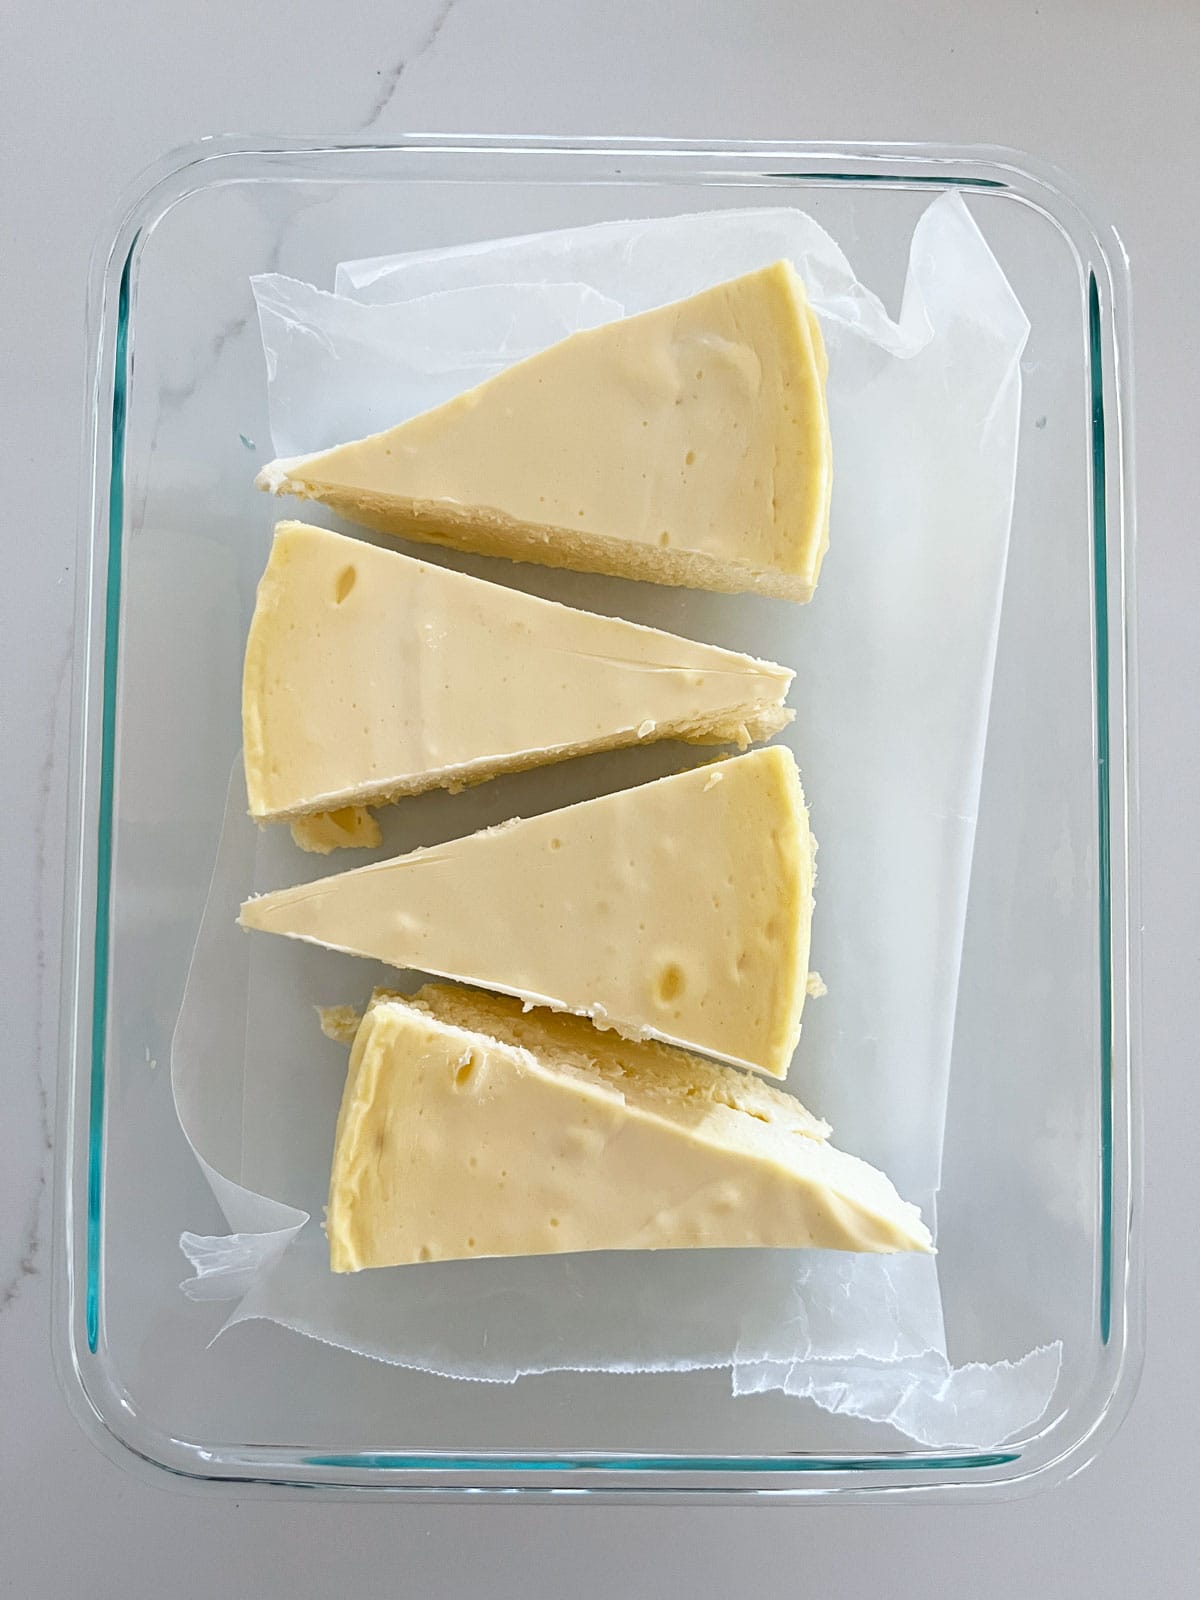 Keto cheesecake slices are stored in a glass food storage container.